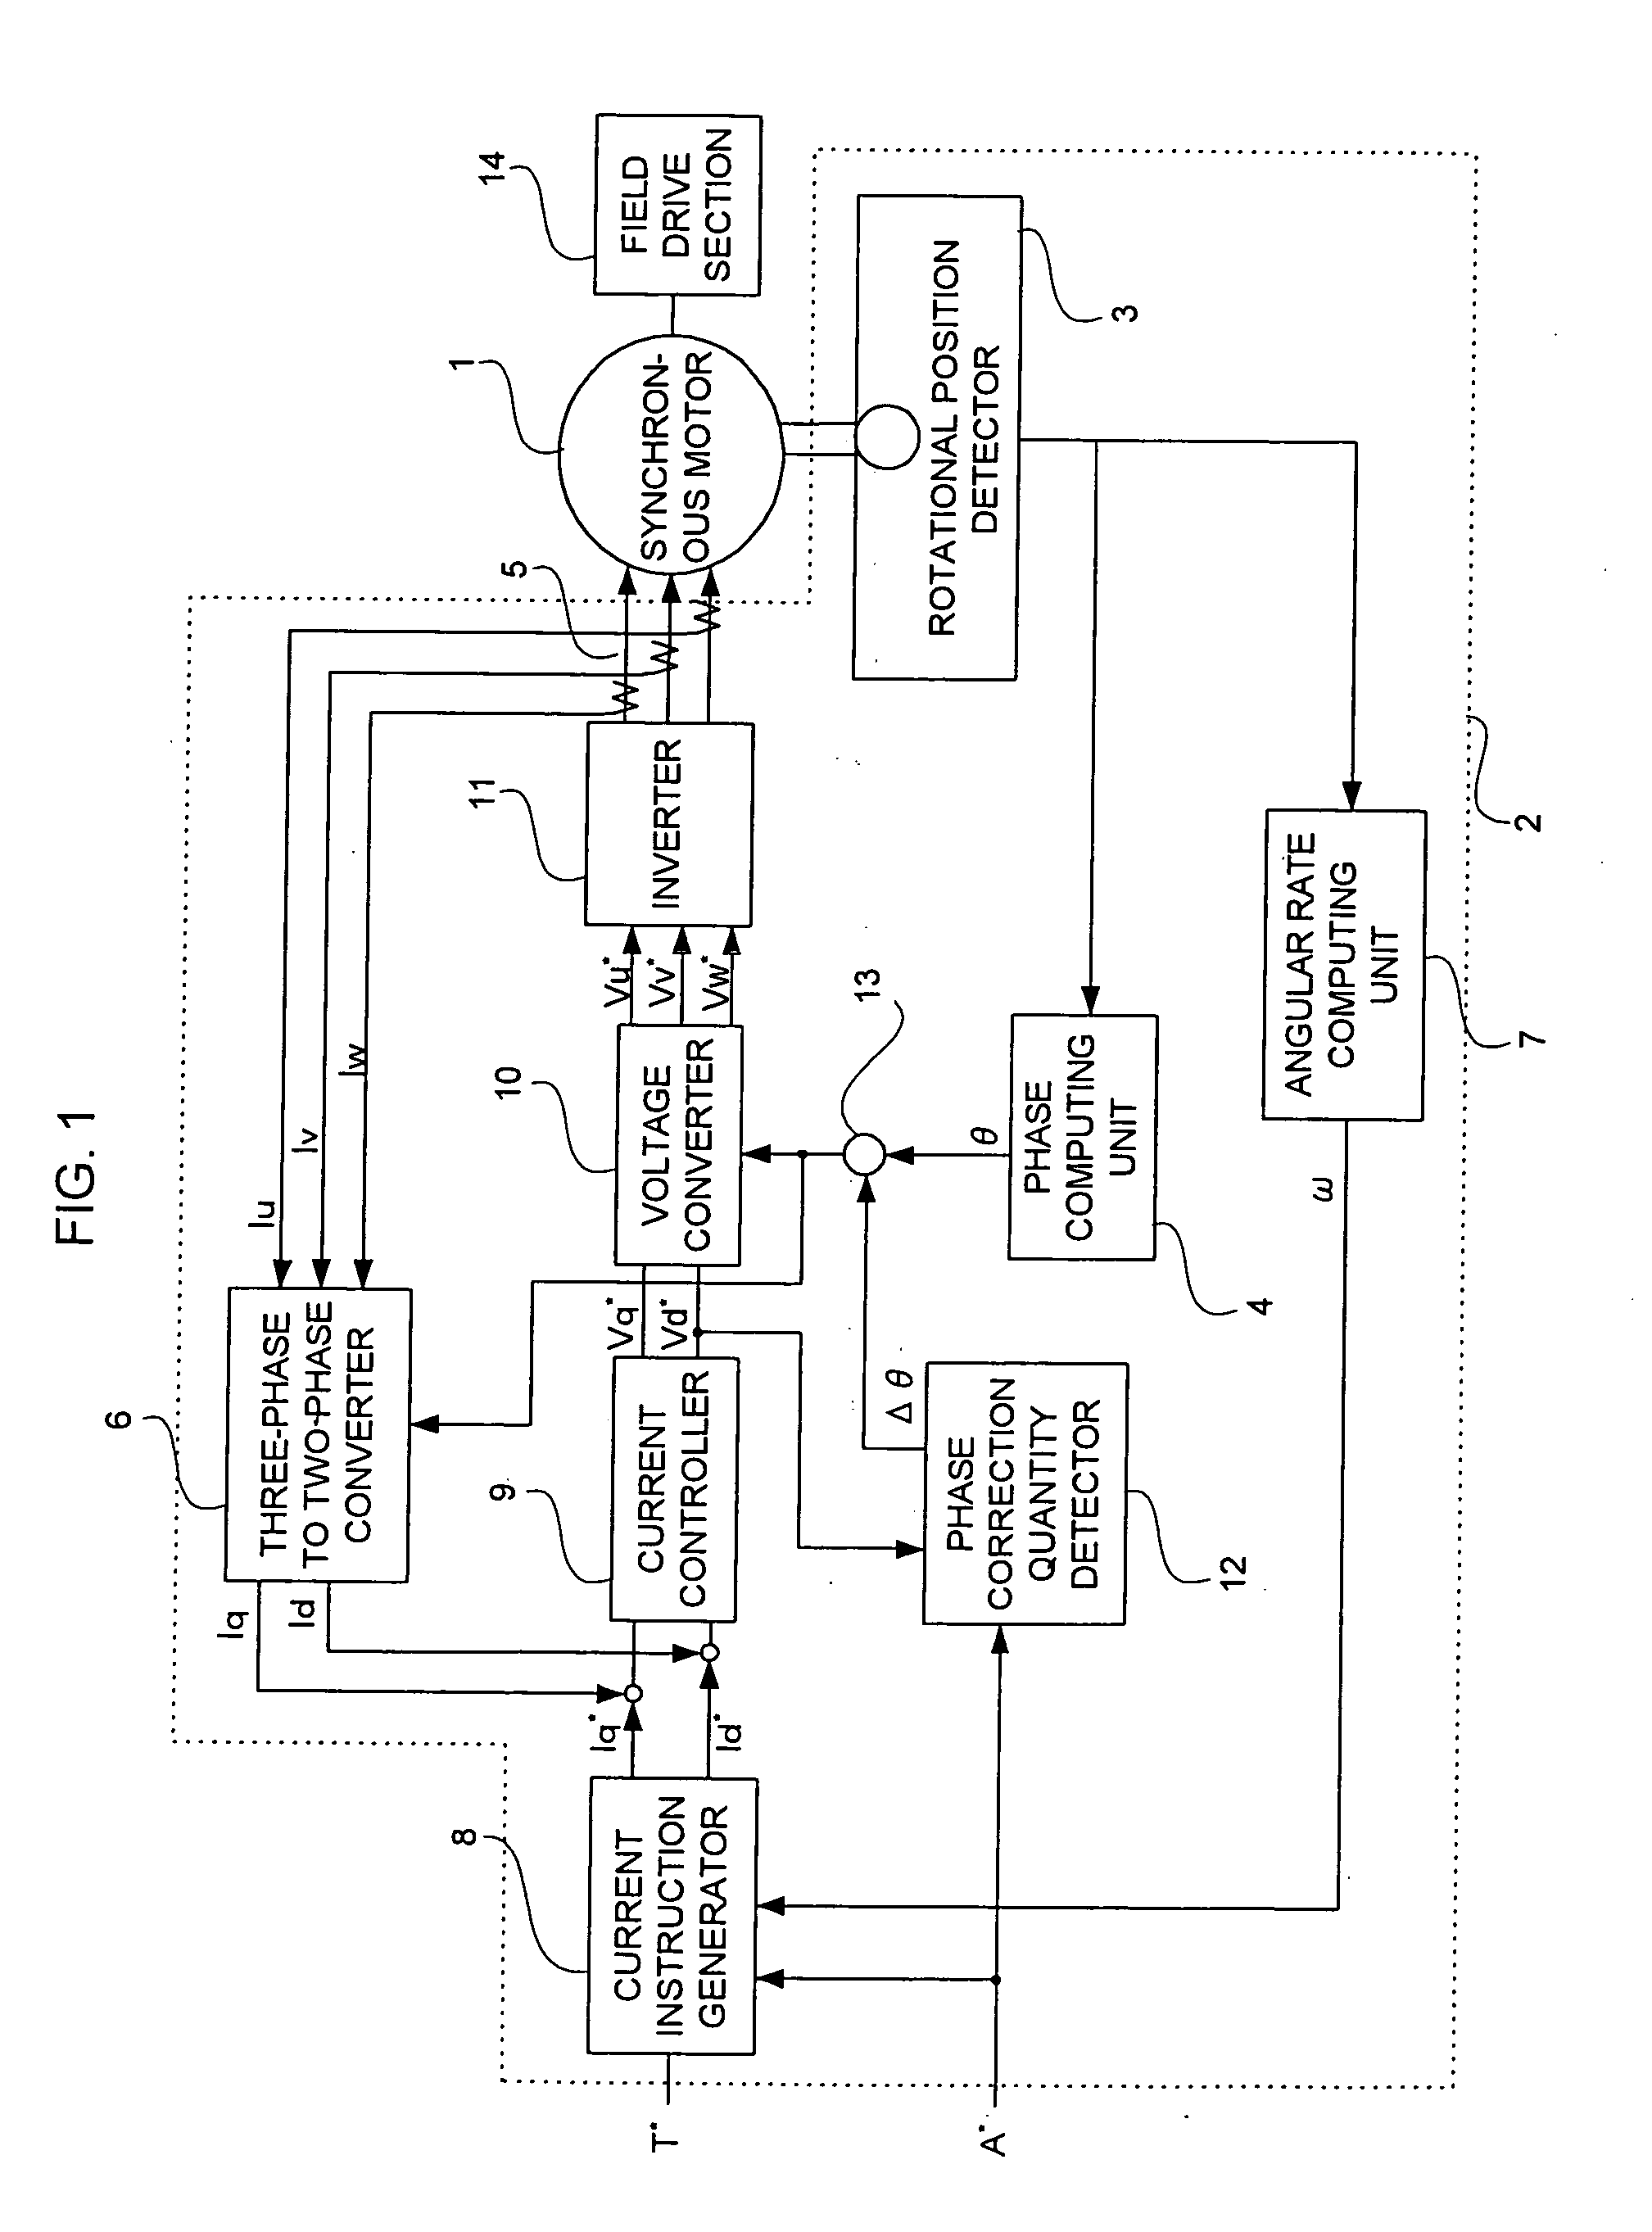 Synchronous motor control device and method of correcting deviation in rotational position of synchronous motor